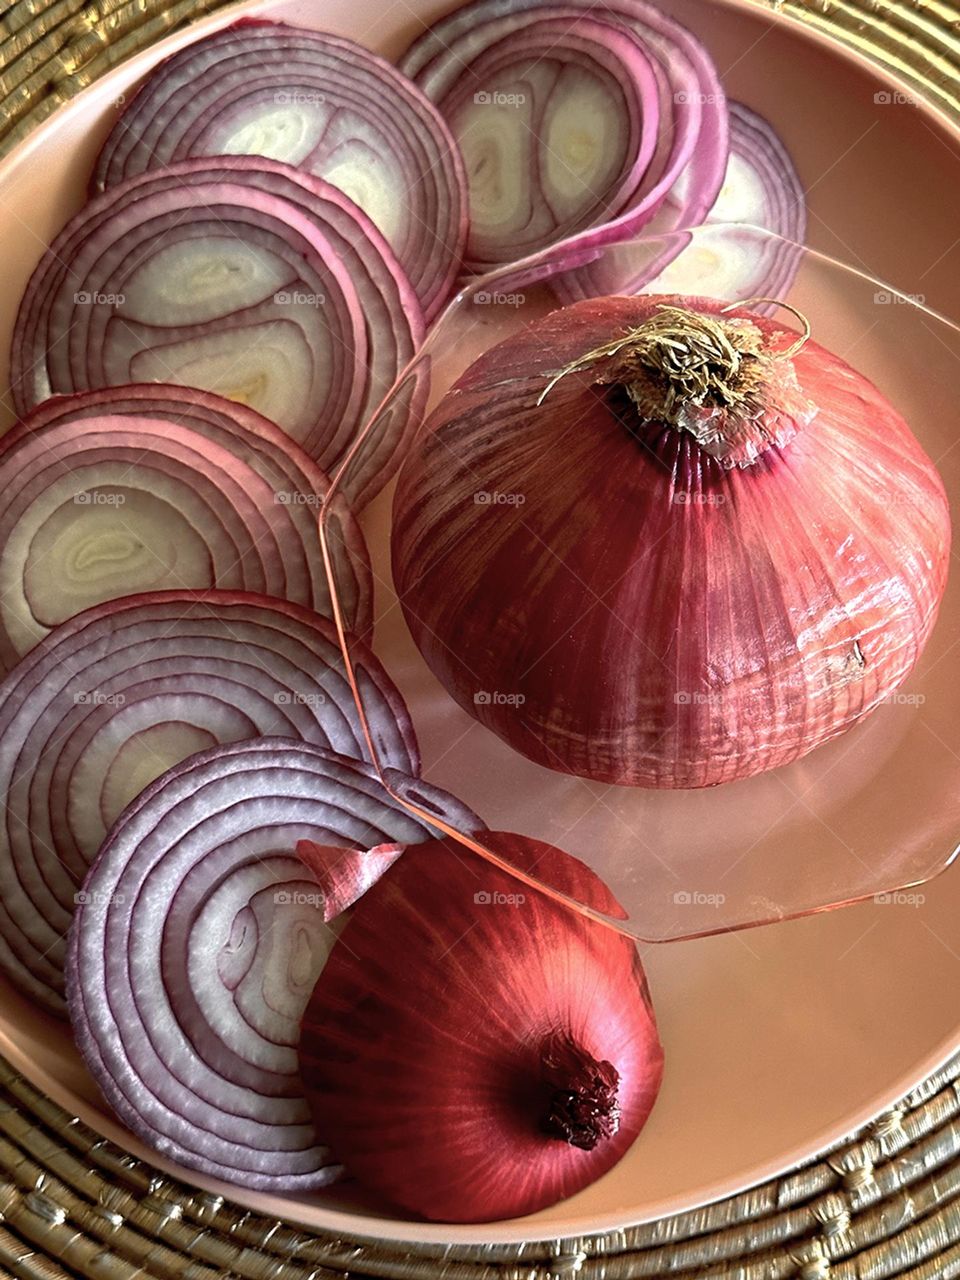 Sliced and whole red onions on a plate placed on a spiral woven placemat